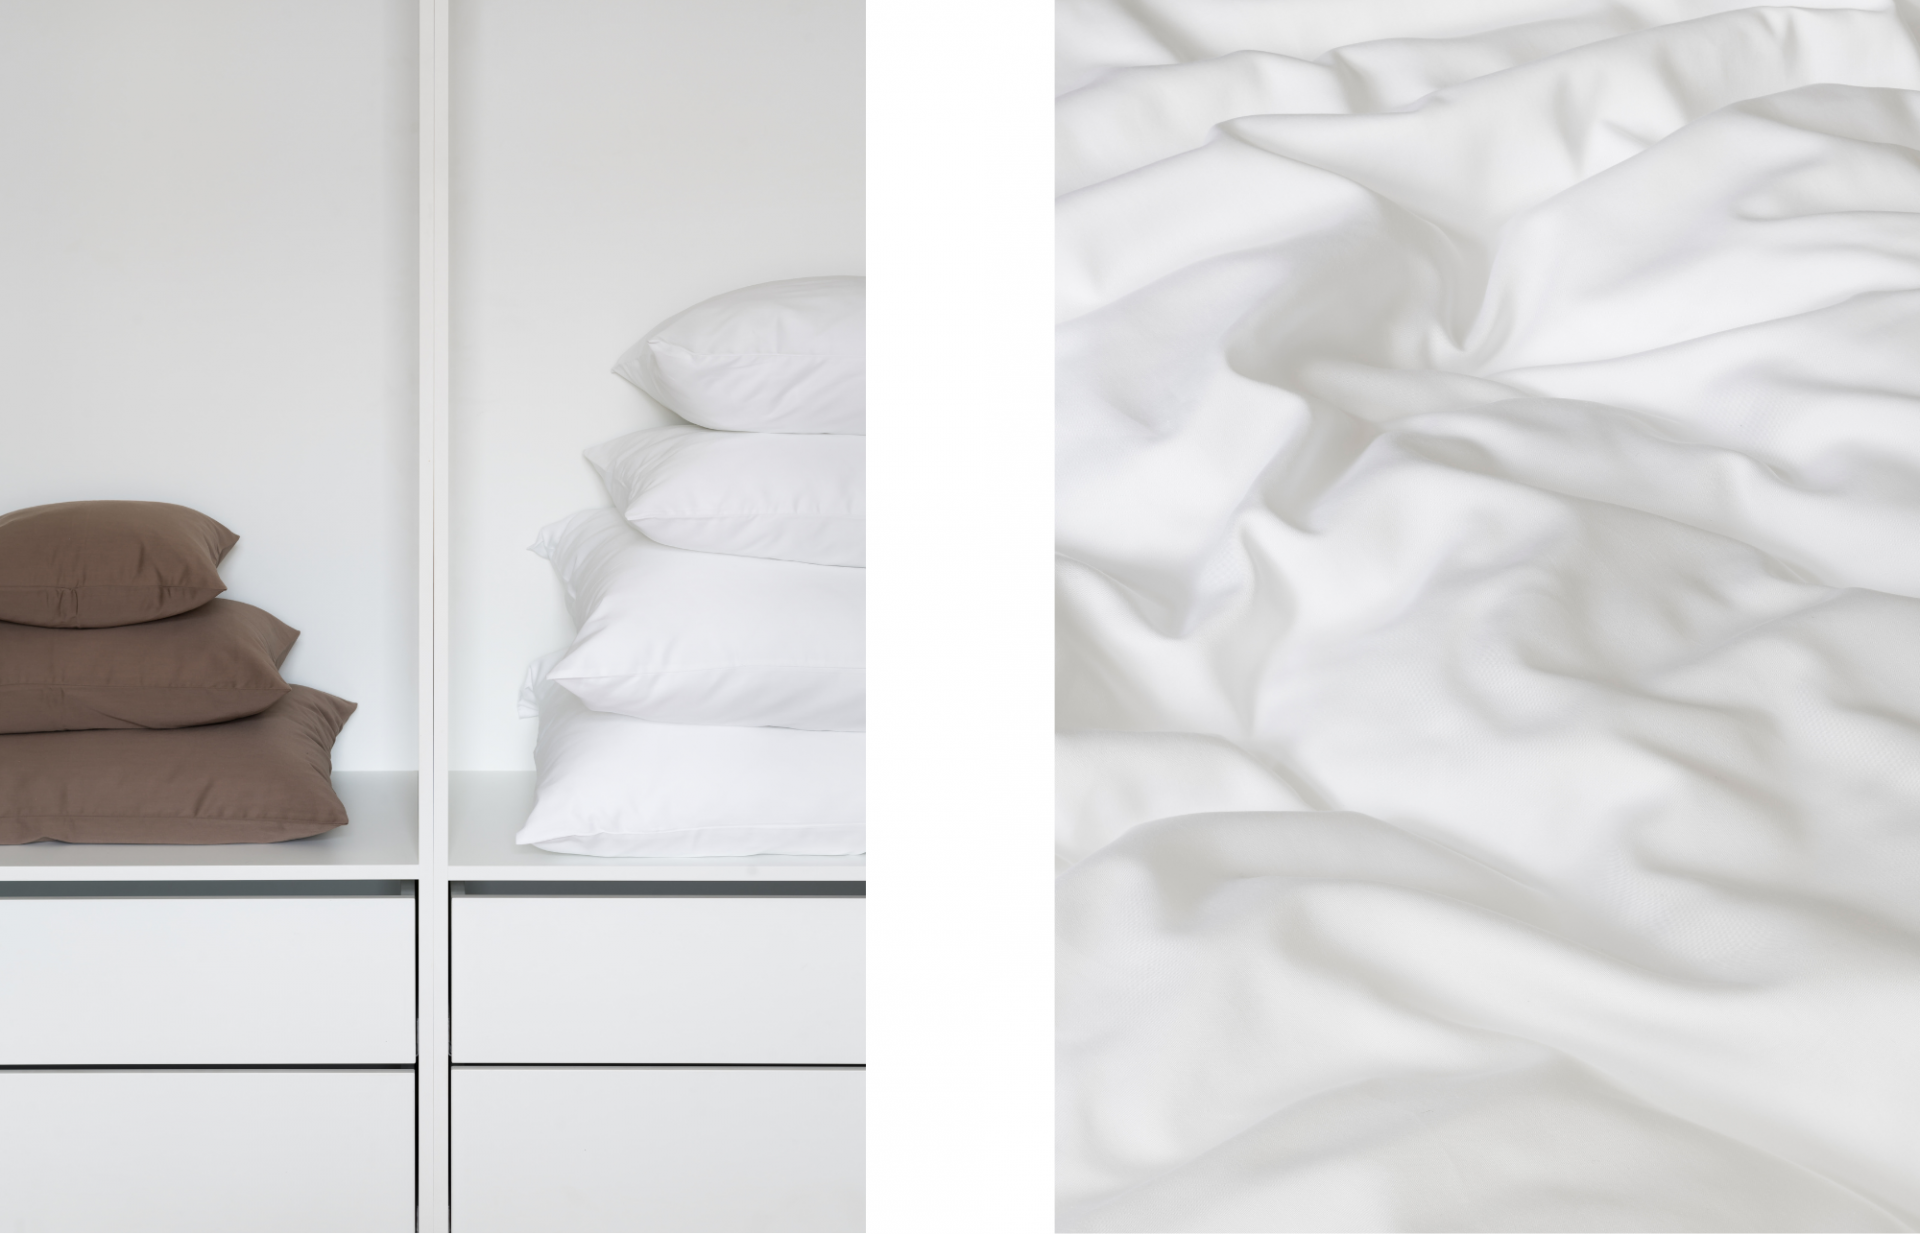 Lejaan minimalist bed linen is absolutely suitable for all.